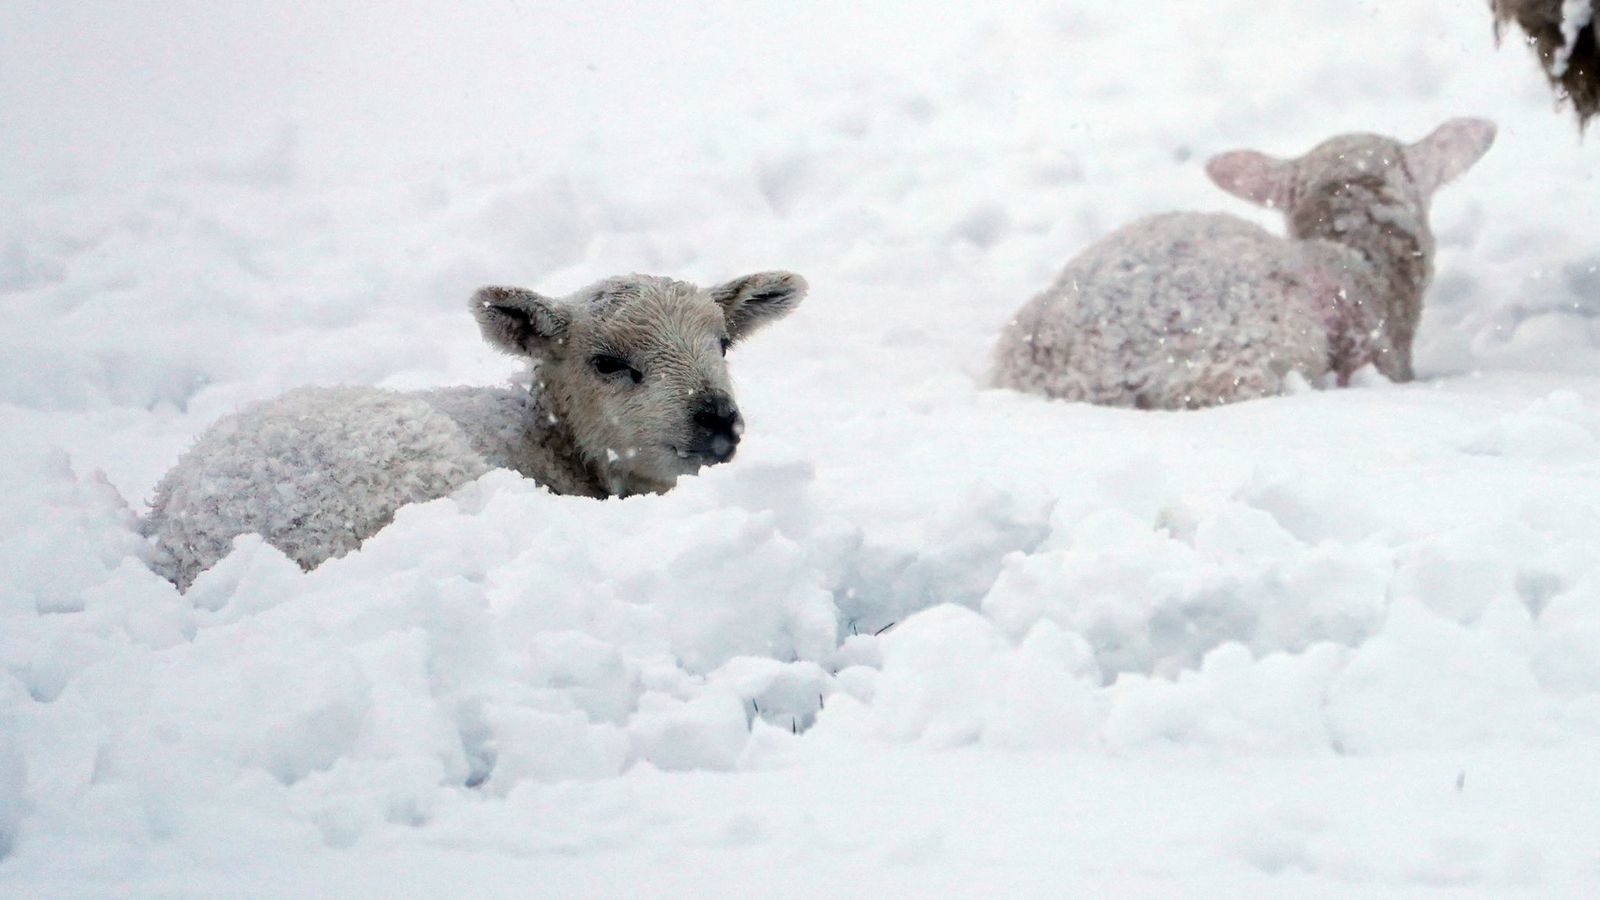 Farmers are concerned for the well-being of their newborn lambs during the cold snap